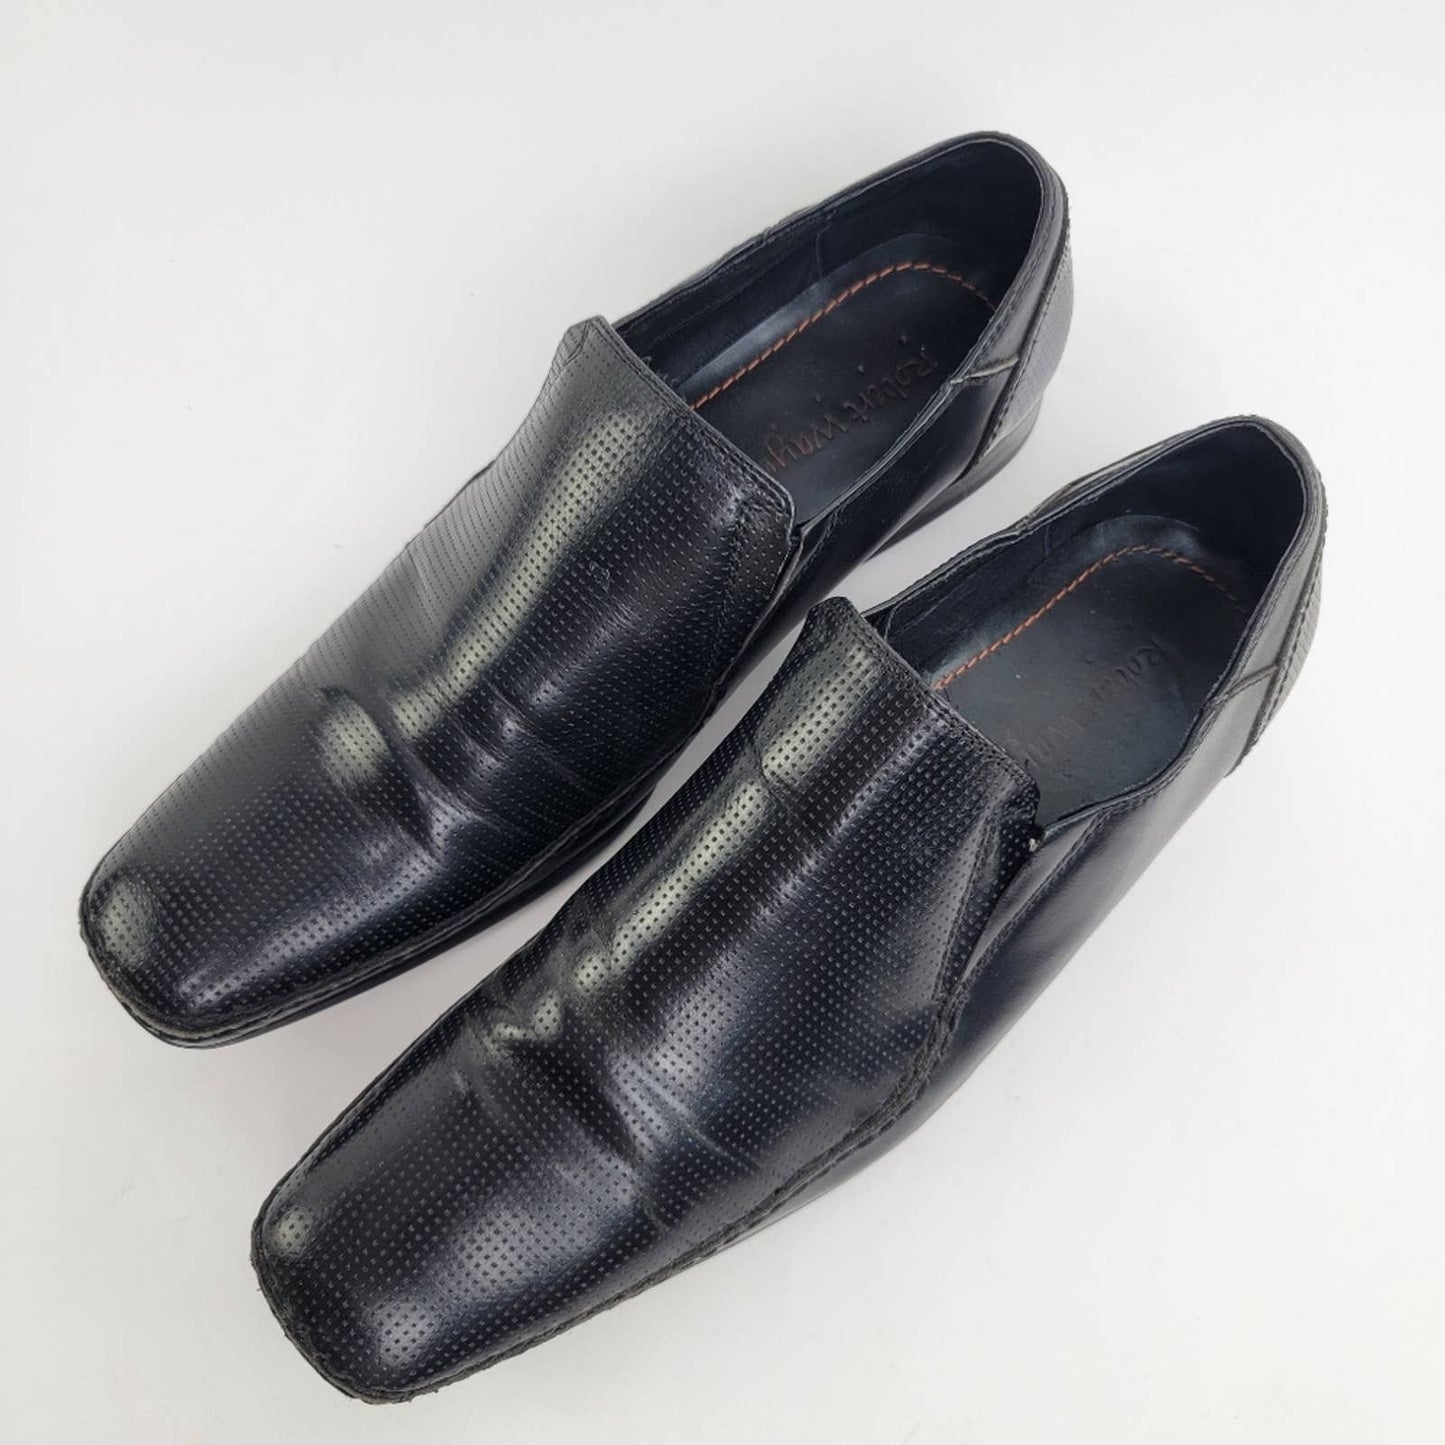 Robert Wayne Crash Snipped Square Toe Black Leather Loafers